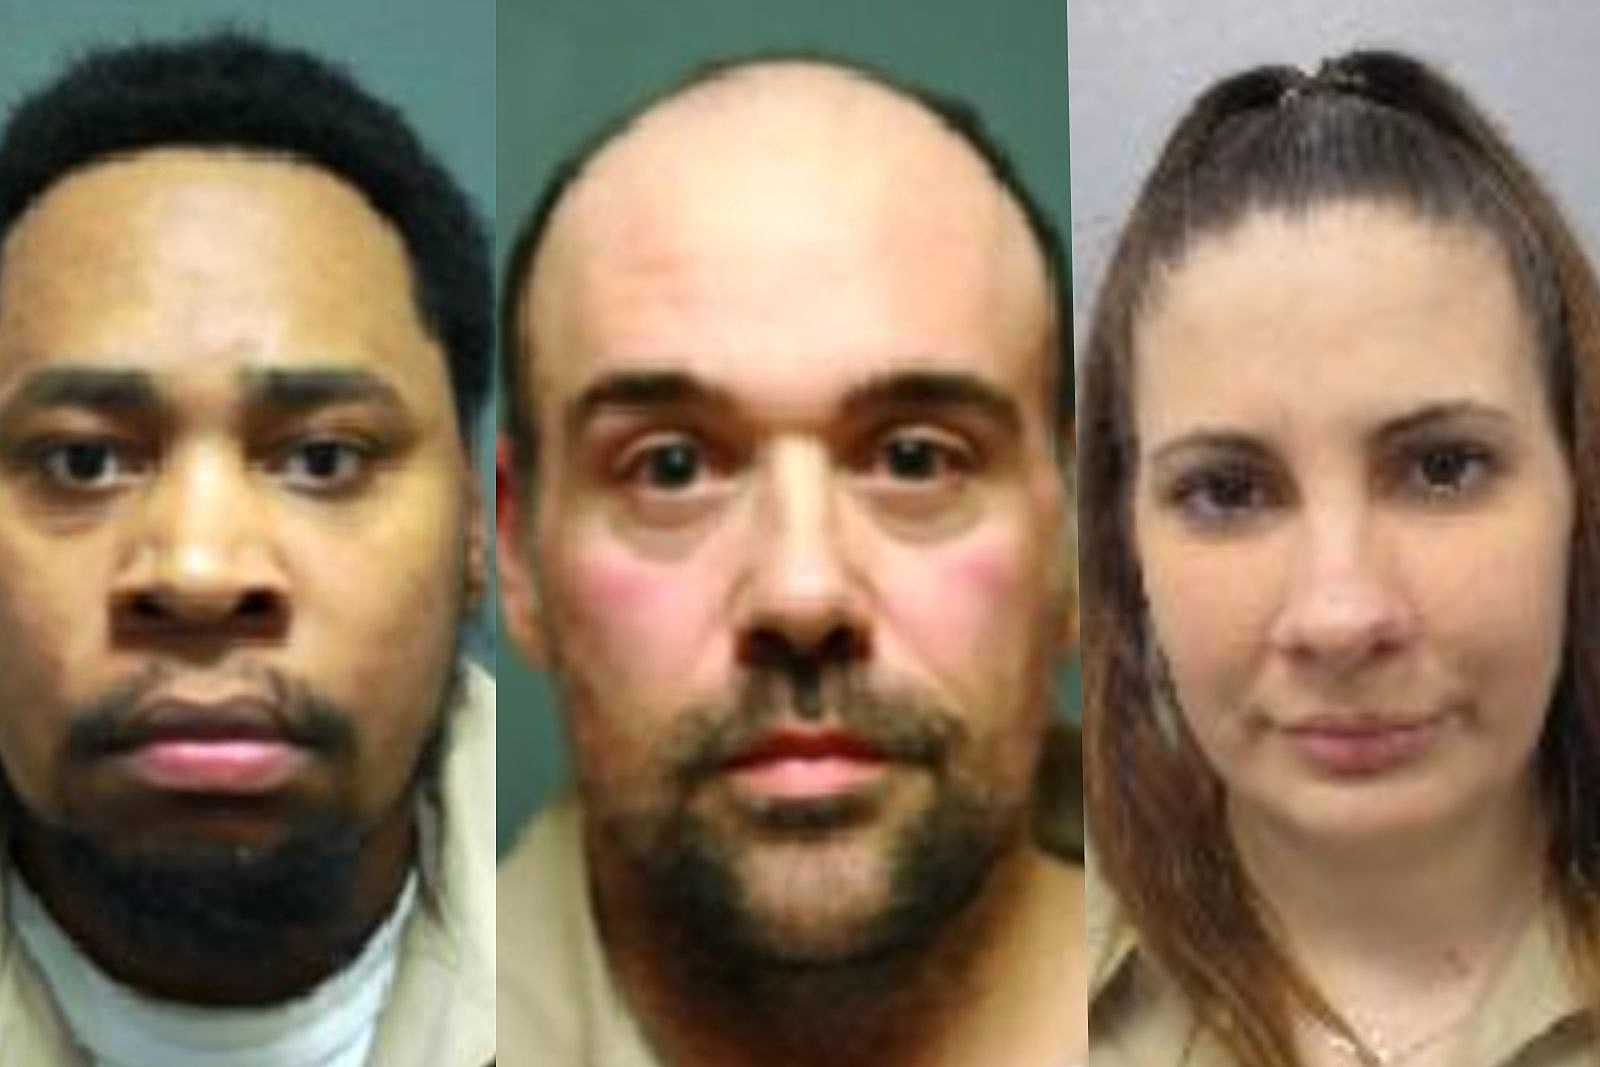 NJ teachers and educators caught in sex crime busts image picture